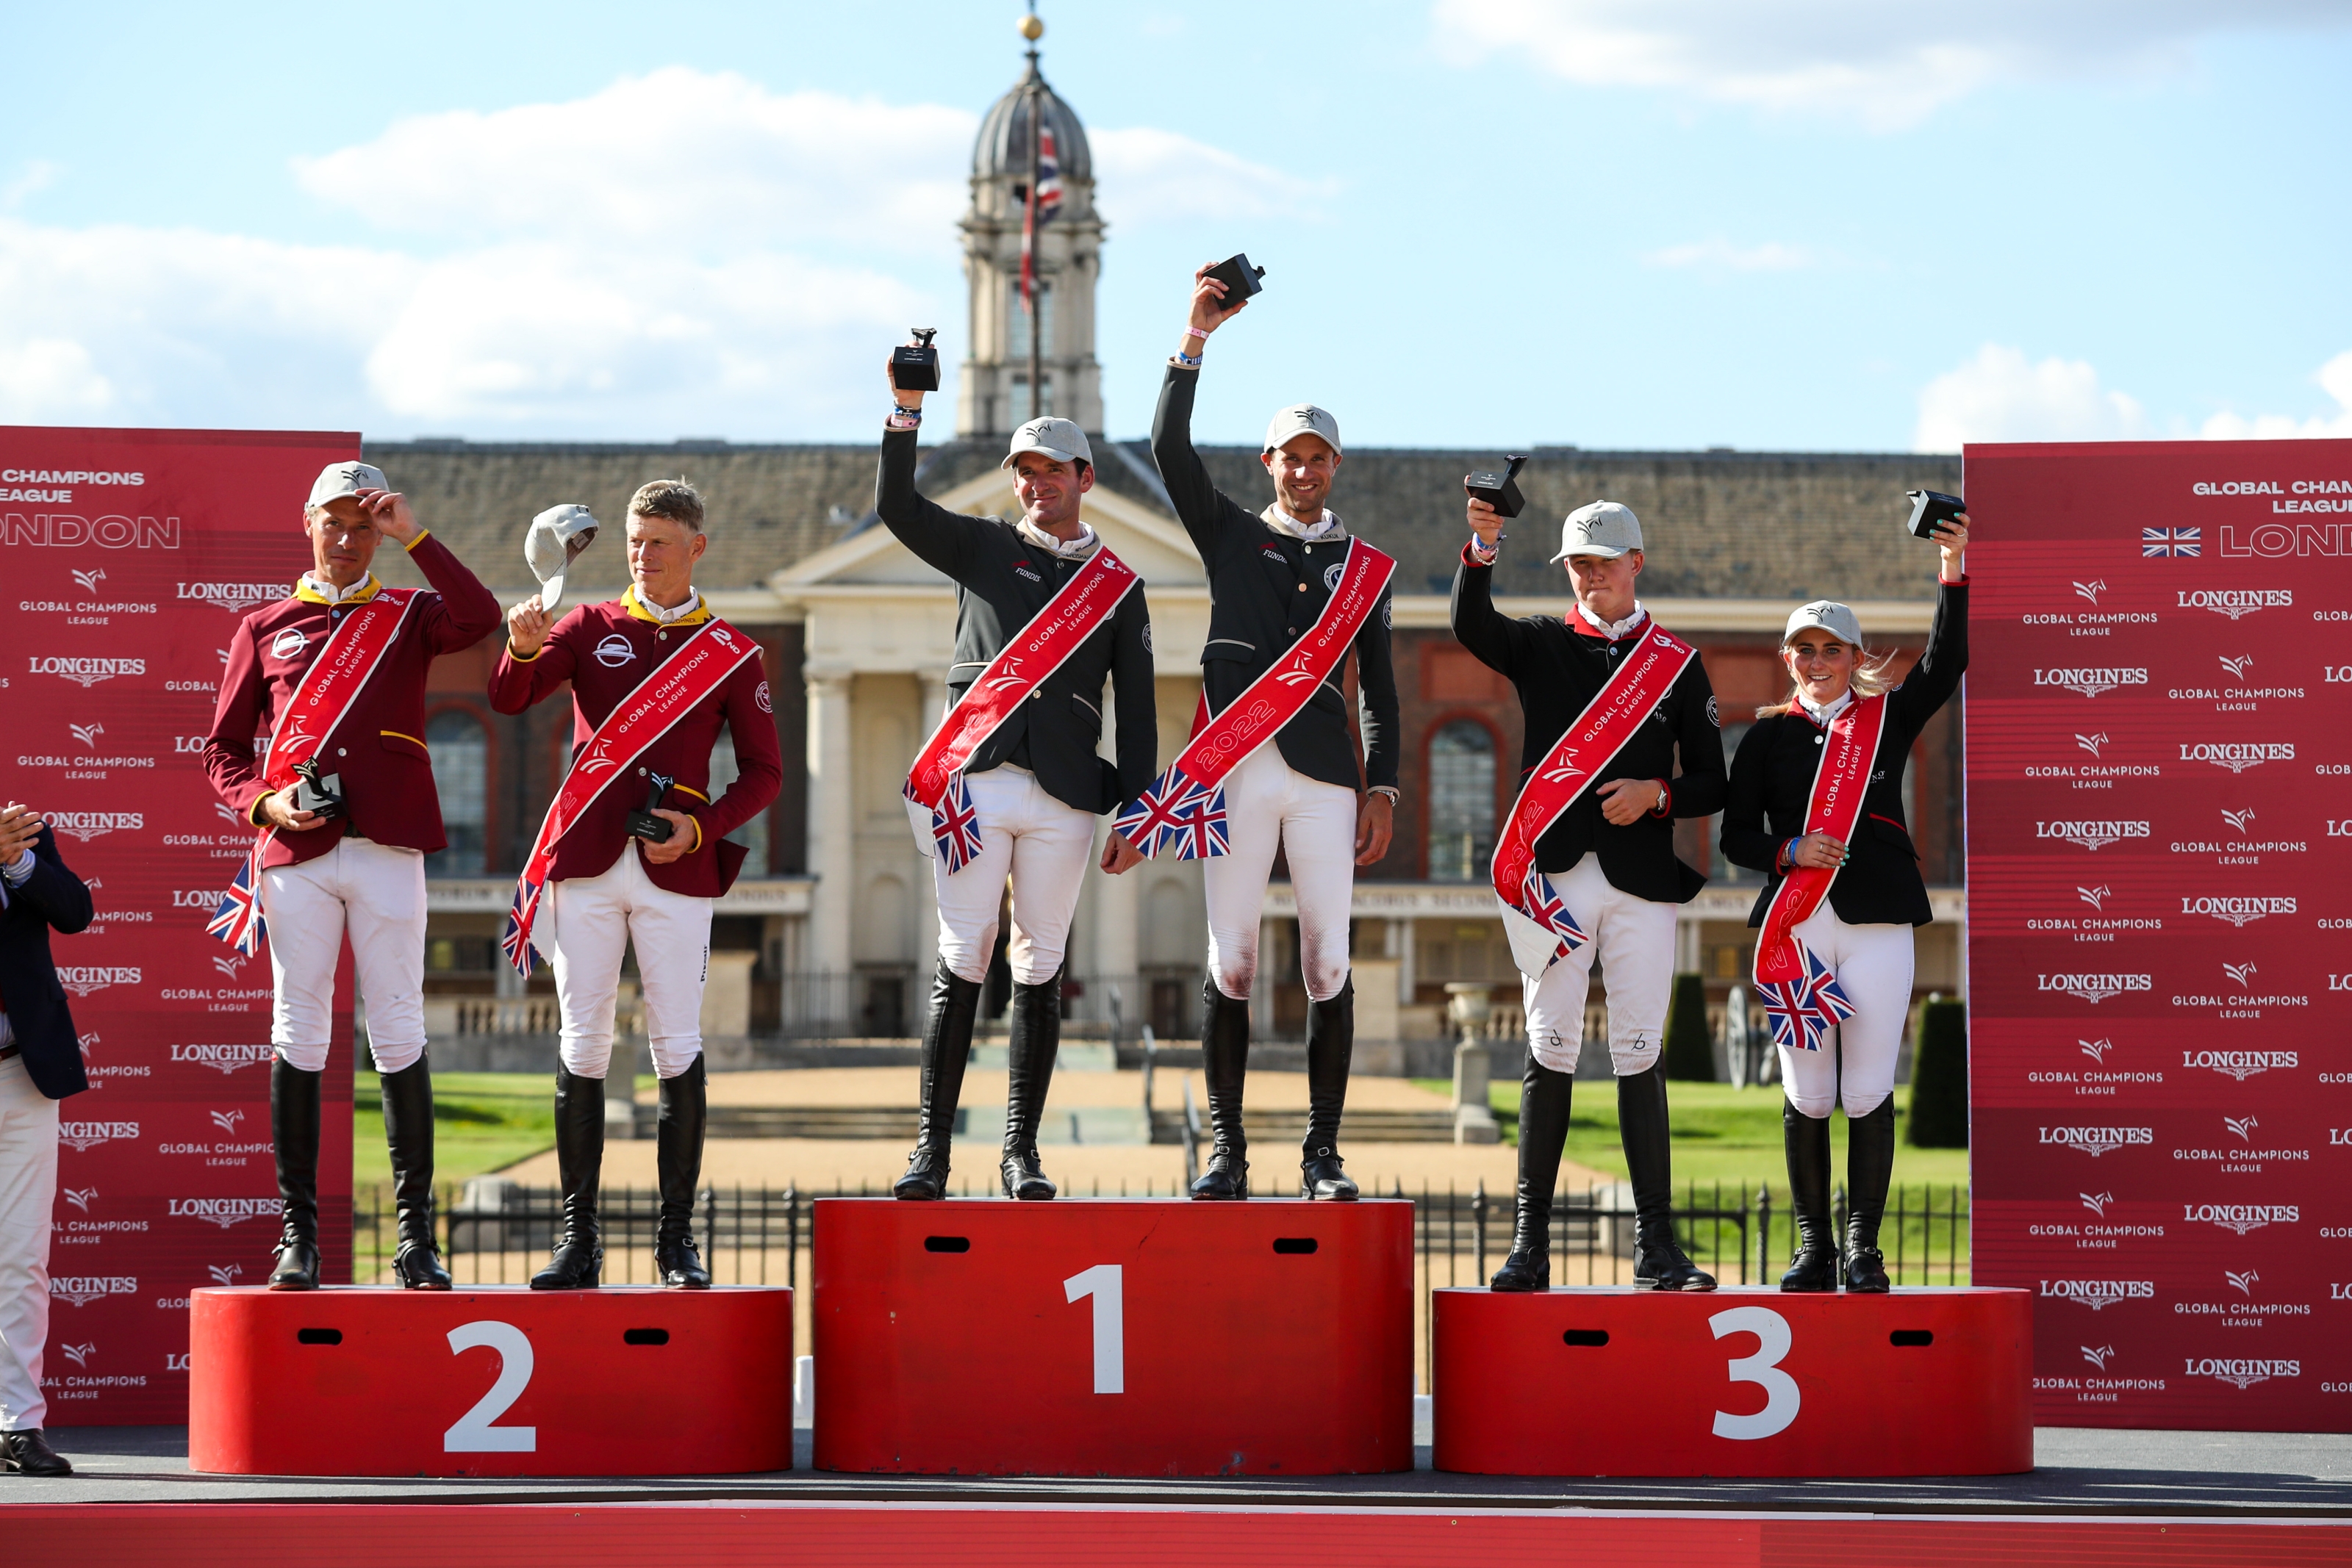 Berlin Eagles close in on Stockholm Hearts in the electrifying championship race at GCL London